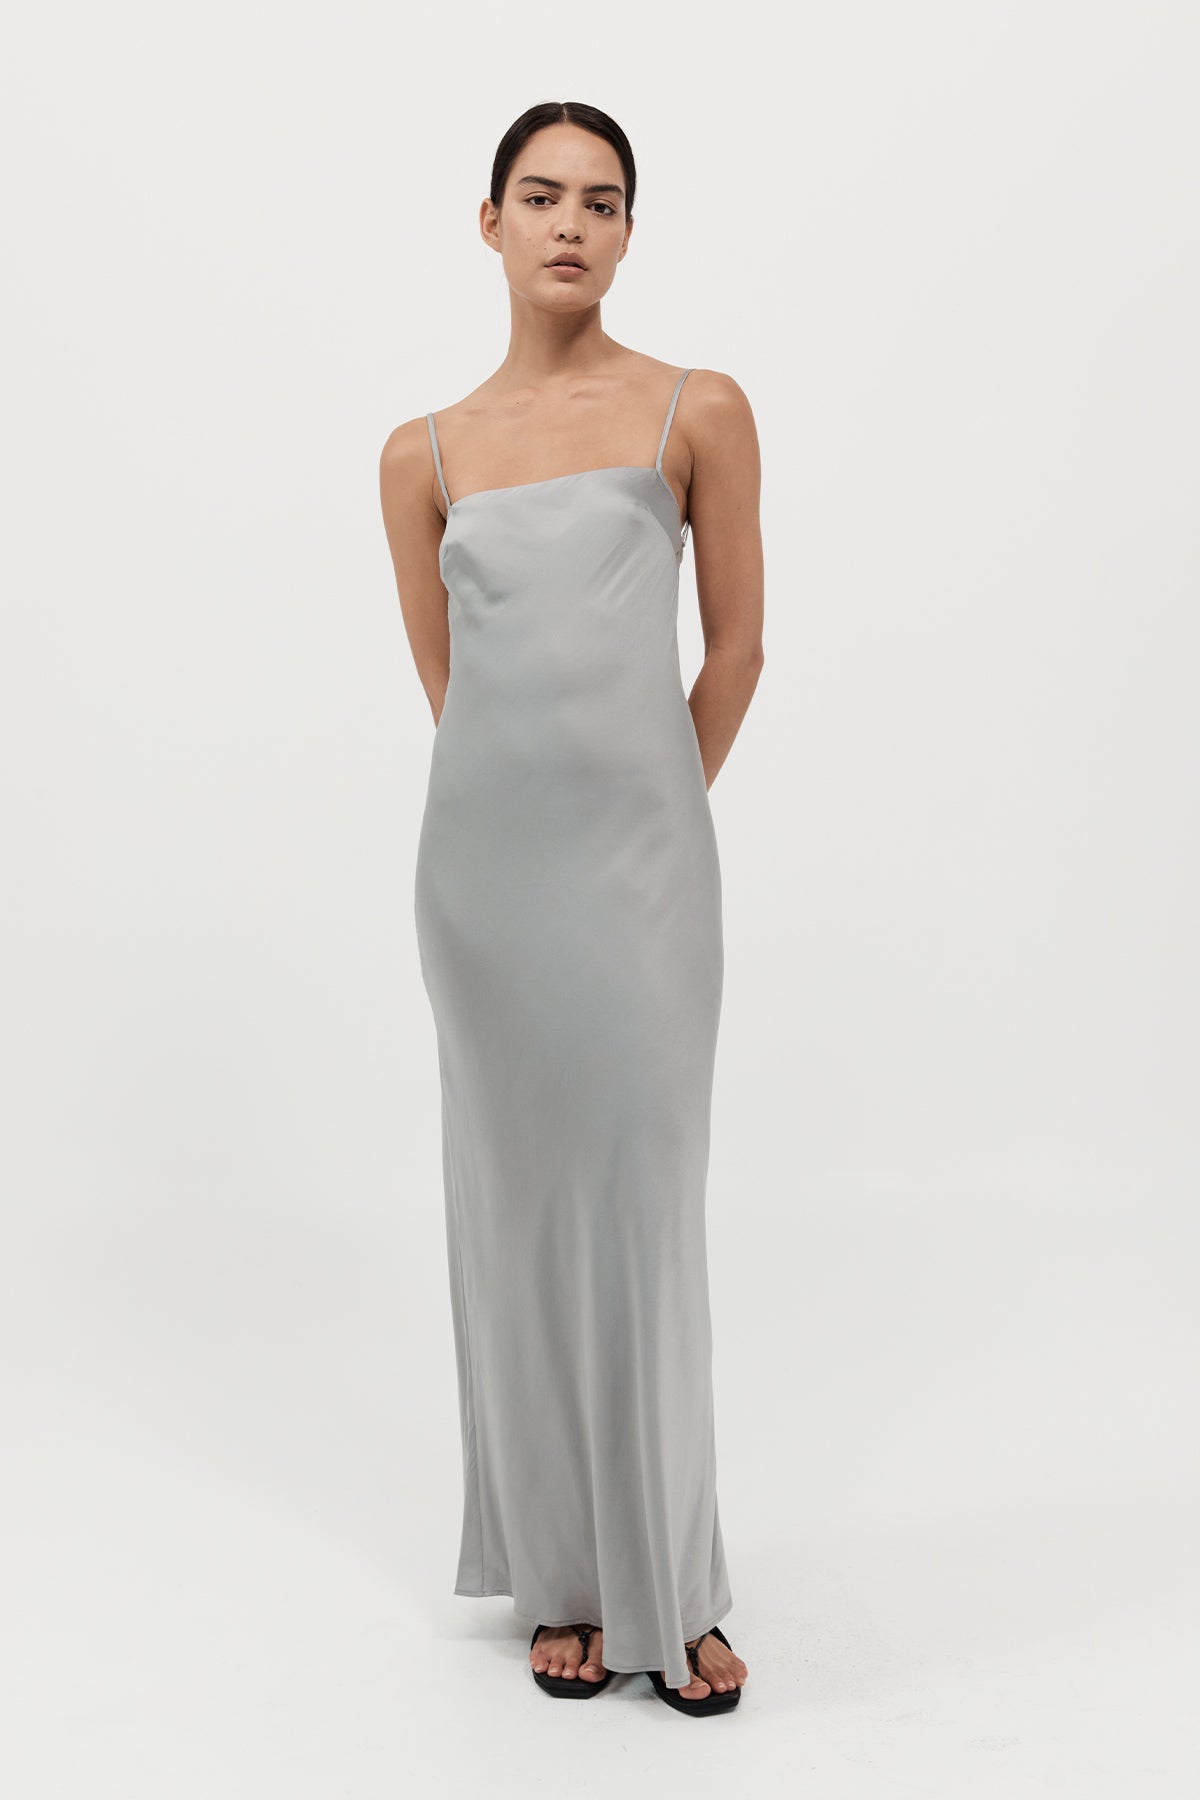 The St Agni Low Back Slip Dress in Silver available at The New Trend Australia